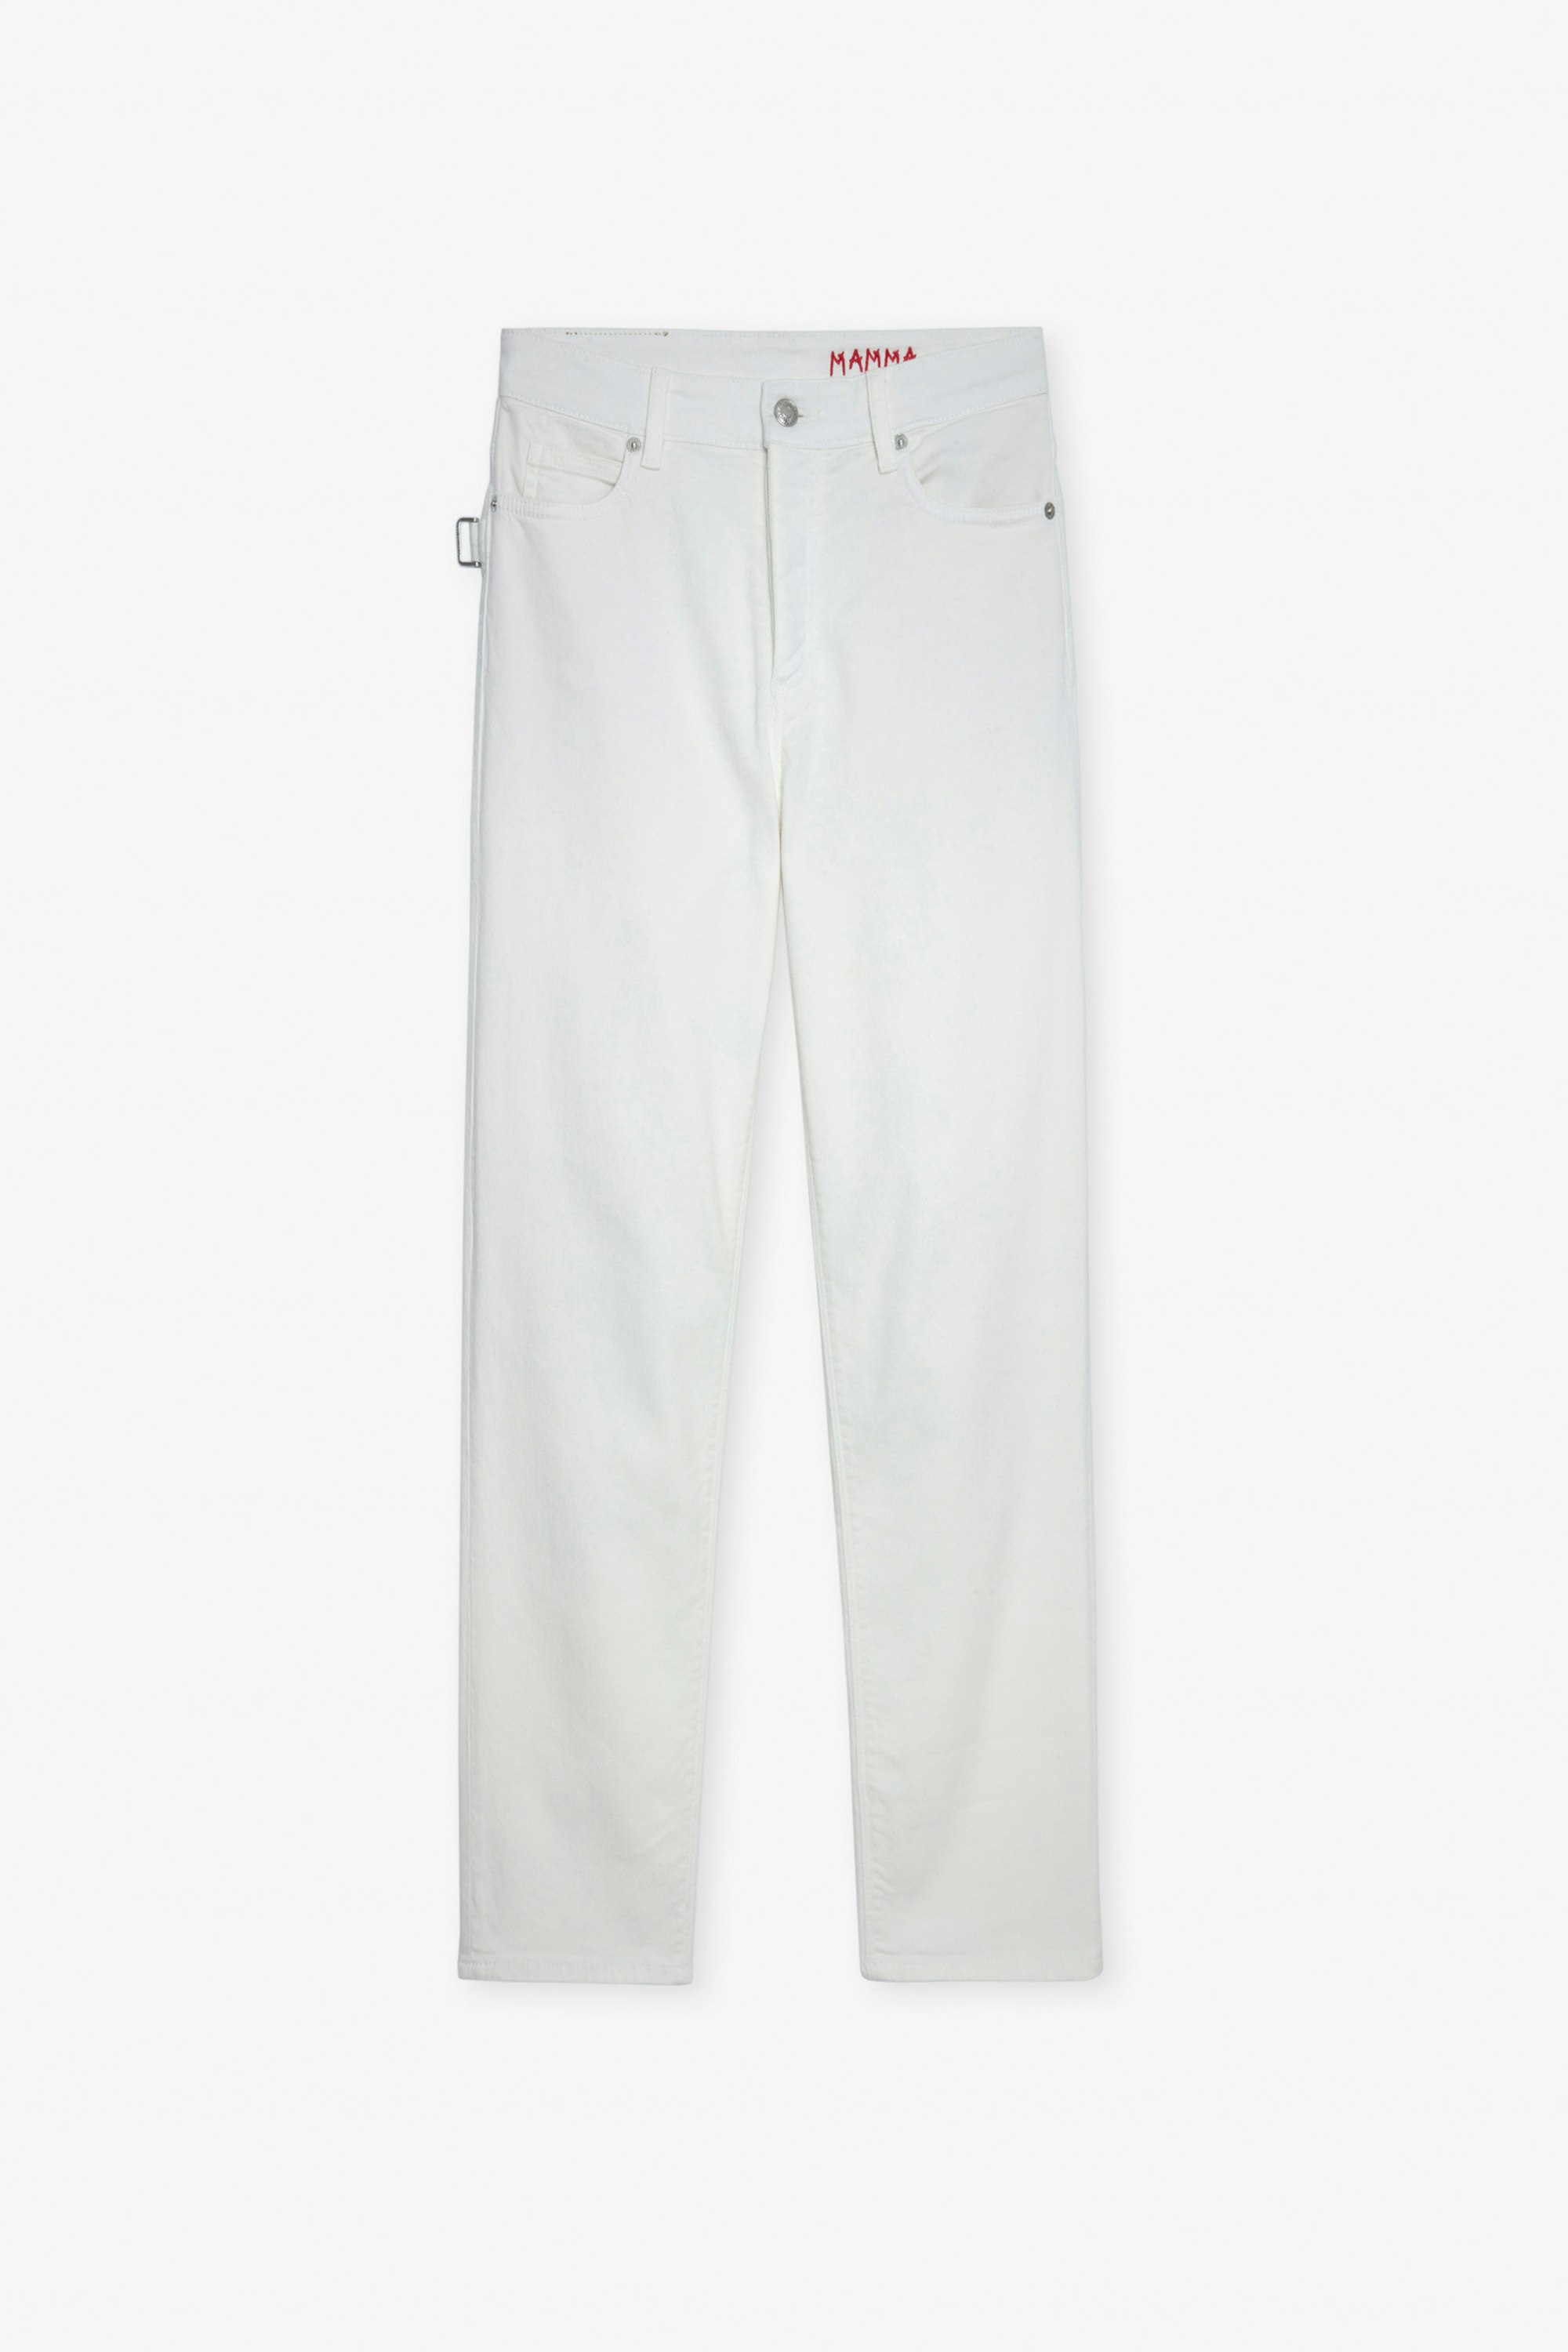 Mamma Jeans - Women’s white denim jeans with “Mamma” embroidery.